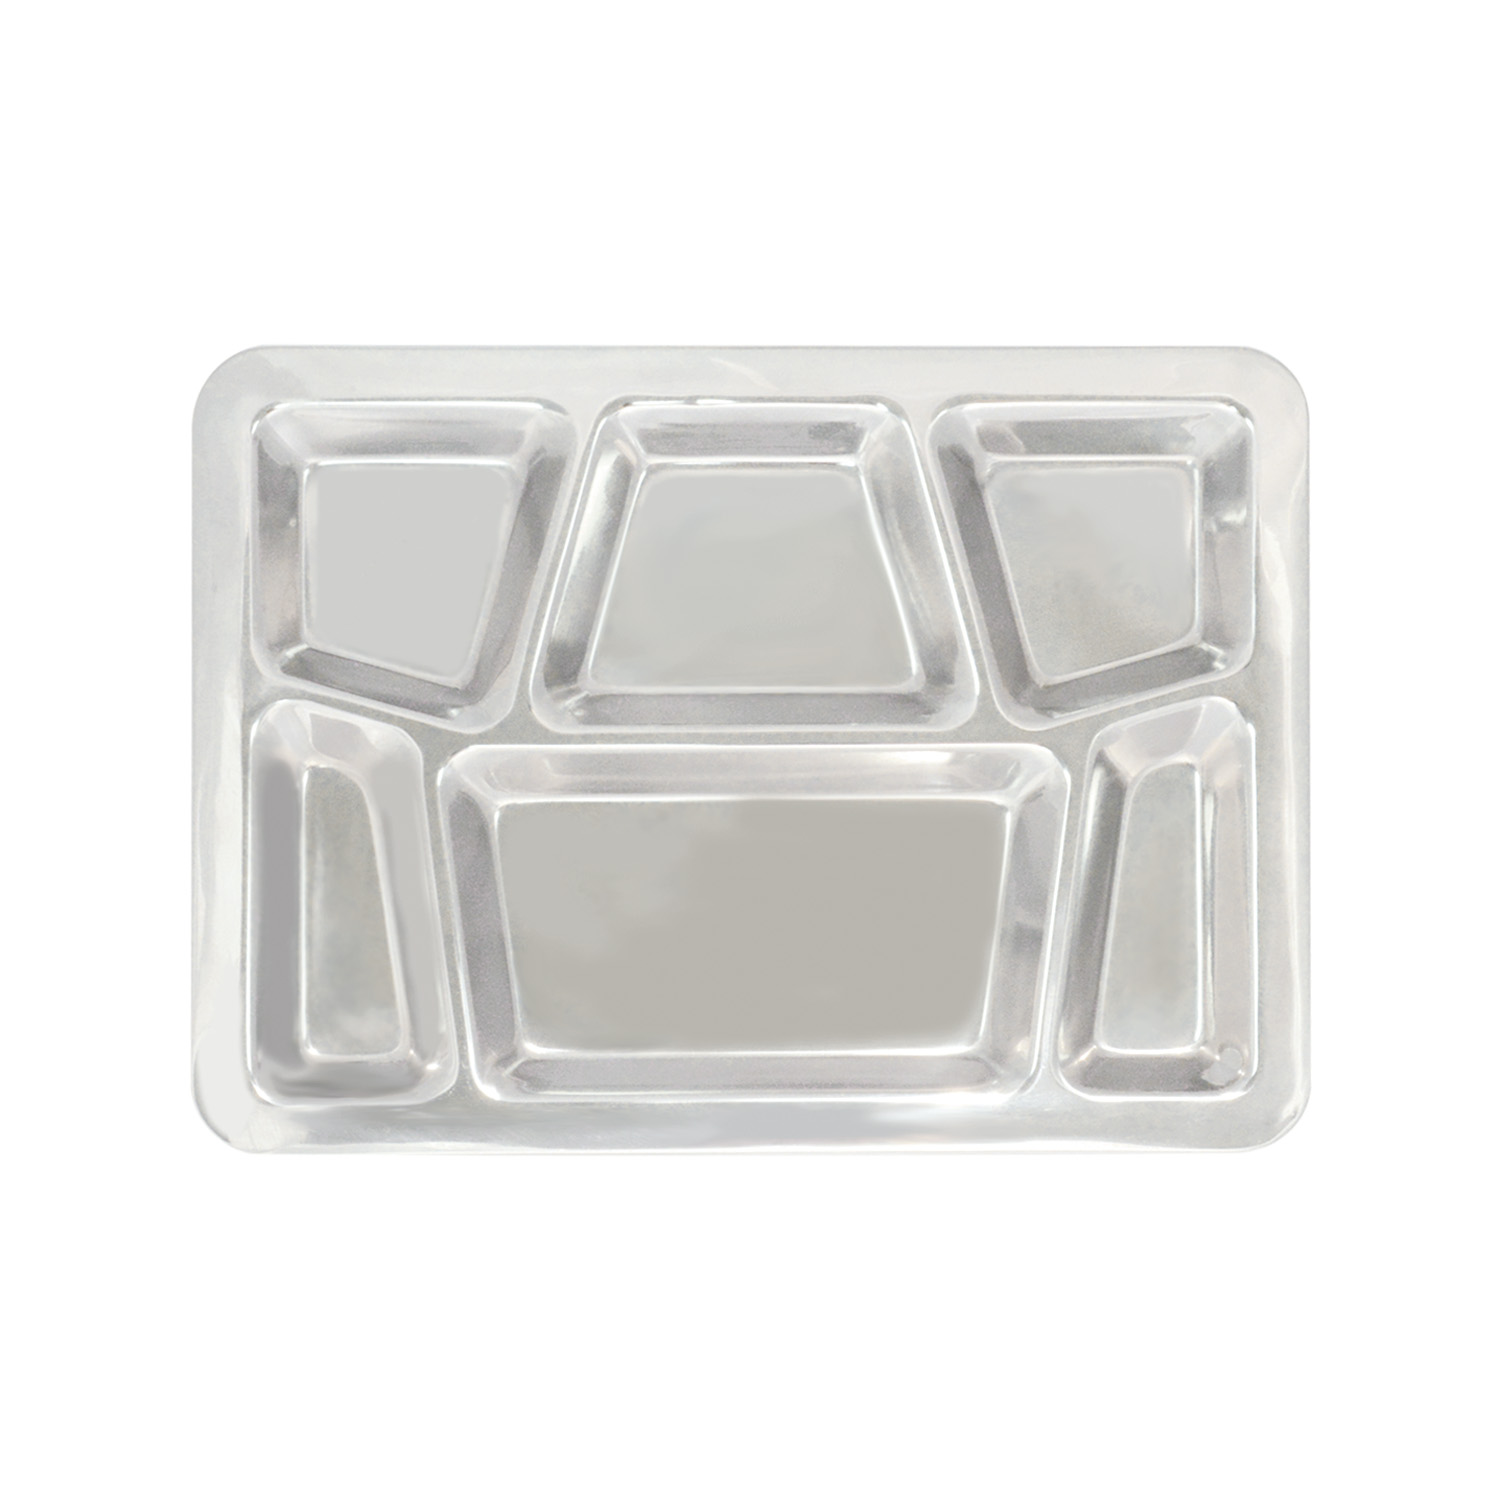 CAC China STRY-6T 6-Compartment Tray with Trapezoid Center 15-1/2" x 11-1/2"